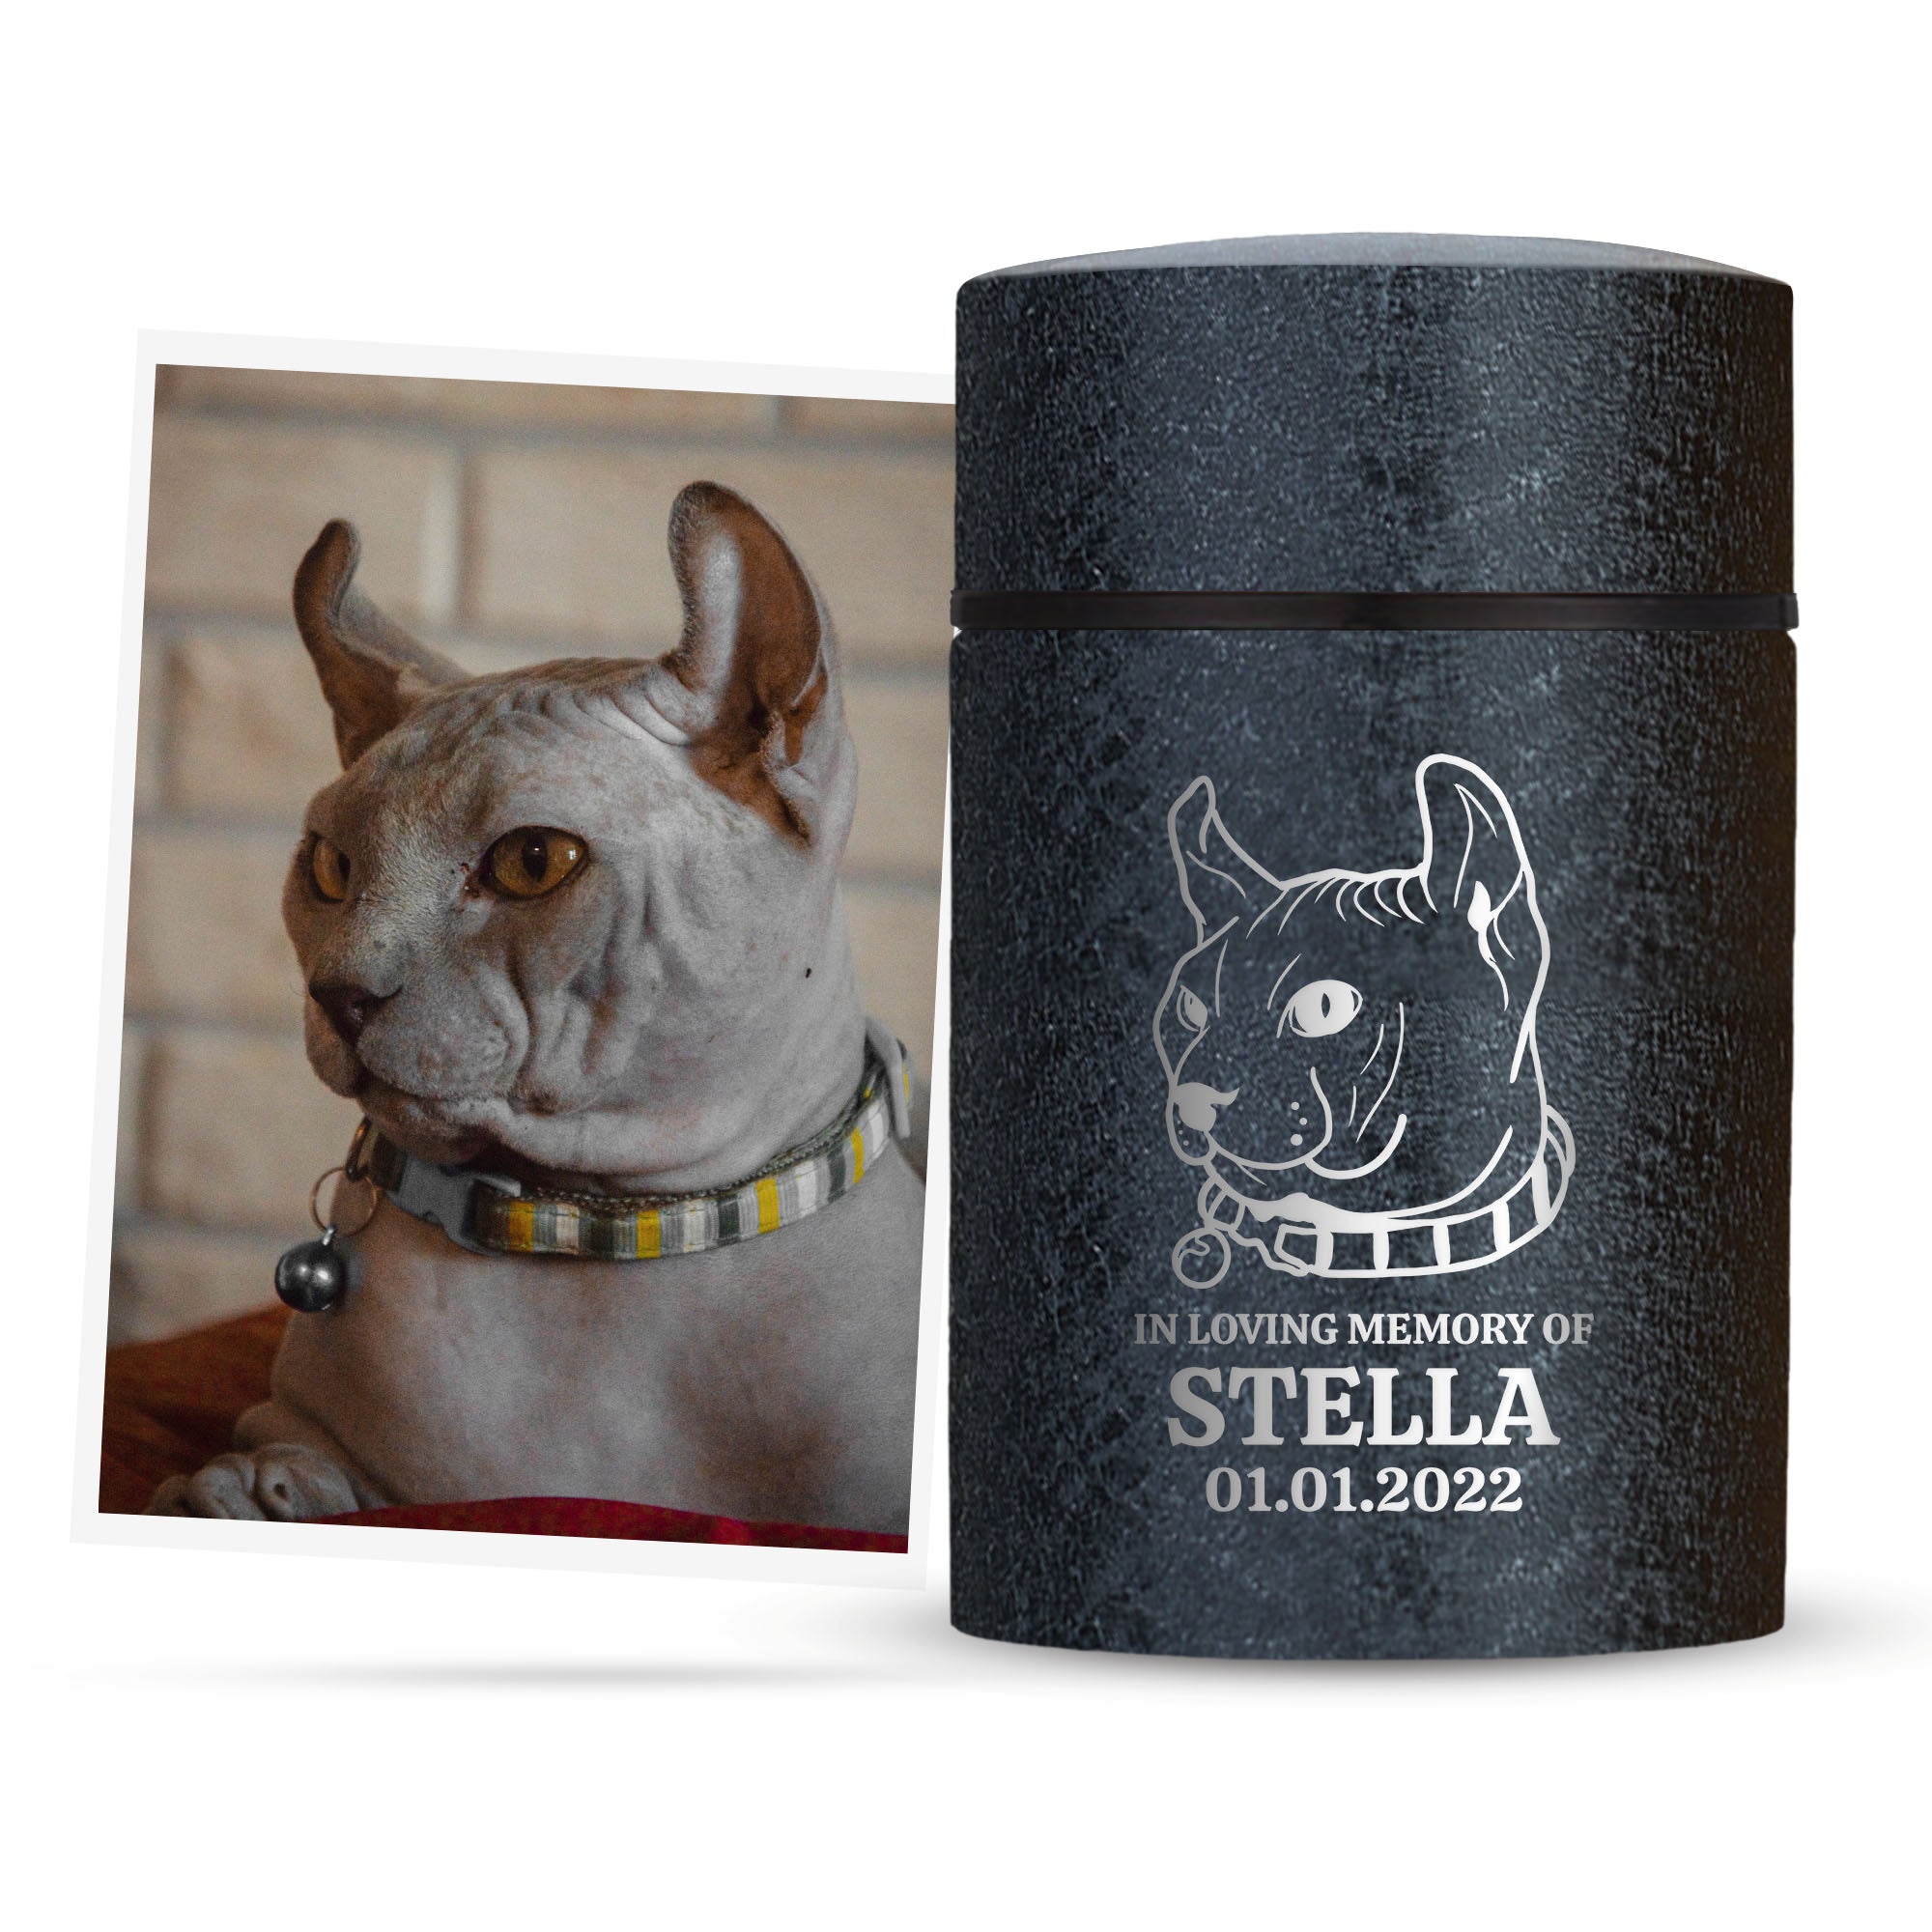 Custom Engraved Pet Photo/Image Compact Mini Urn Keepsake - Personalized Textured Cremation Urn - Stainless Steel Urn for Pet Memorial Ashes, Ice Red, Ice Blue , Ice Black | 3.2" x 2" (4-8 lb Capacity)